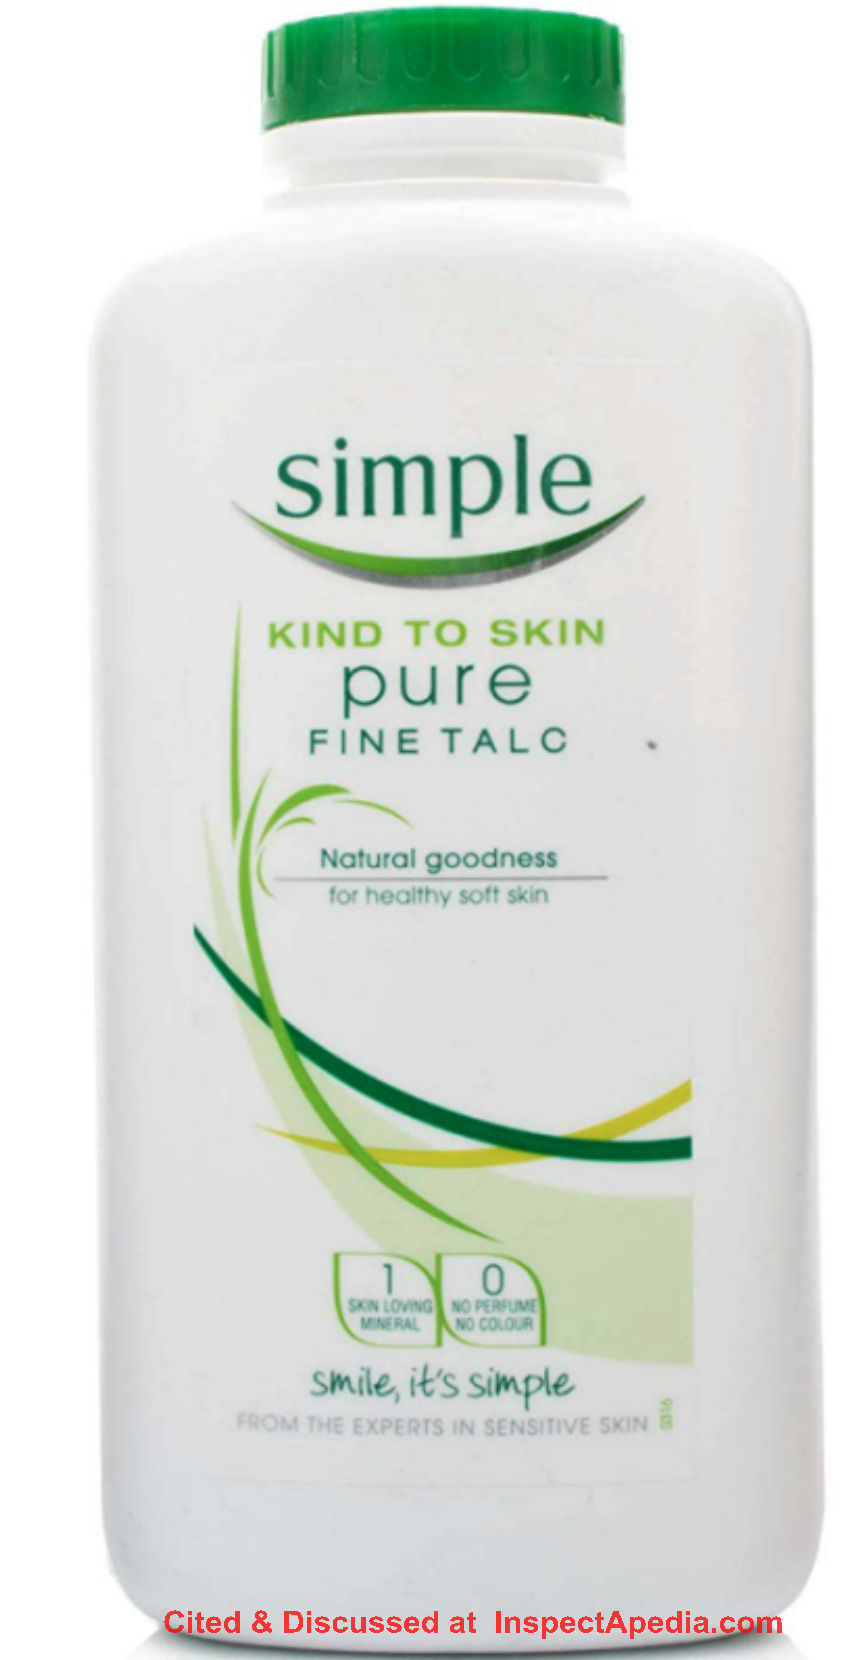 Simple Pure Fine Talc body powder, sold in the UK - cited & discussed at InspectApedia.com